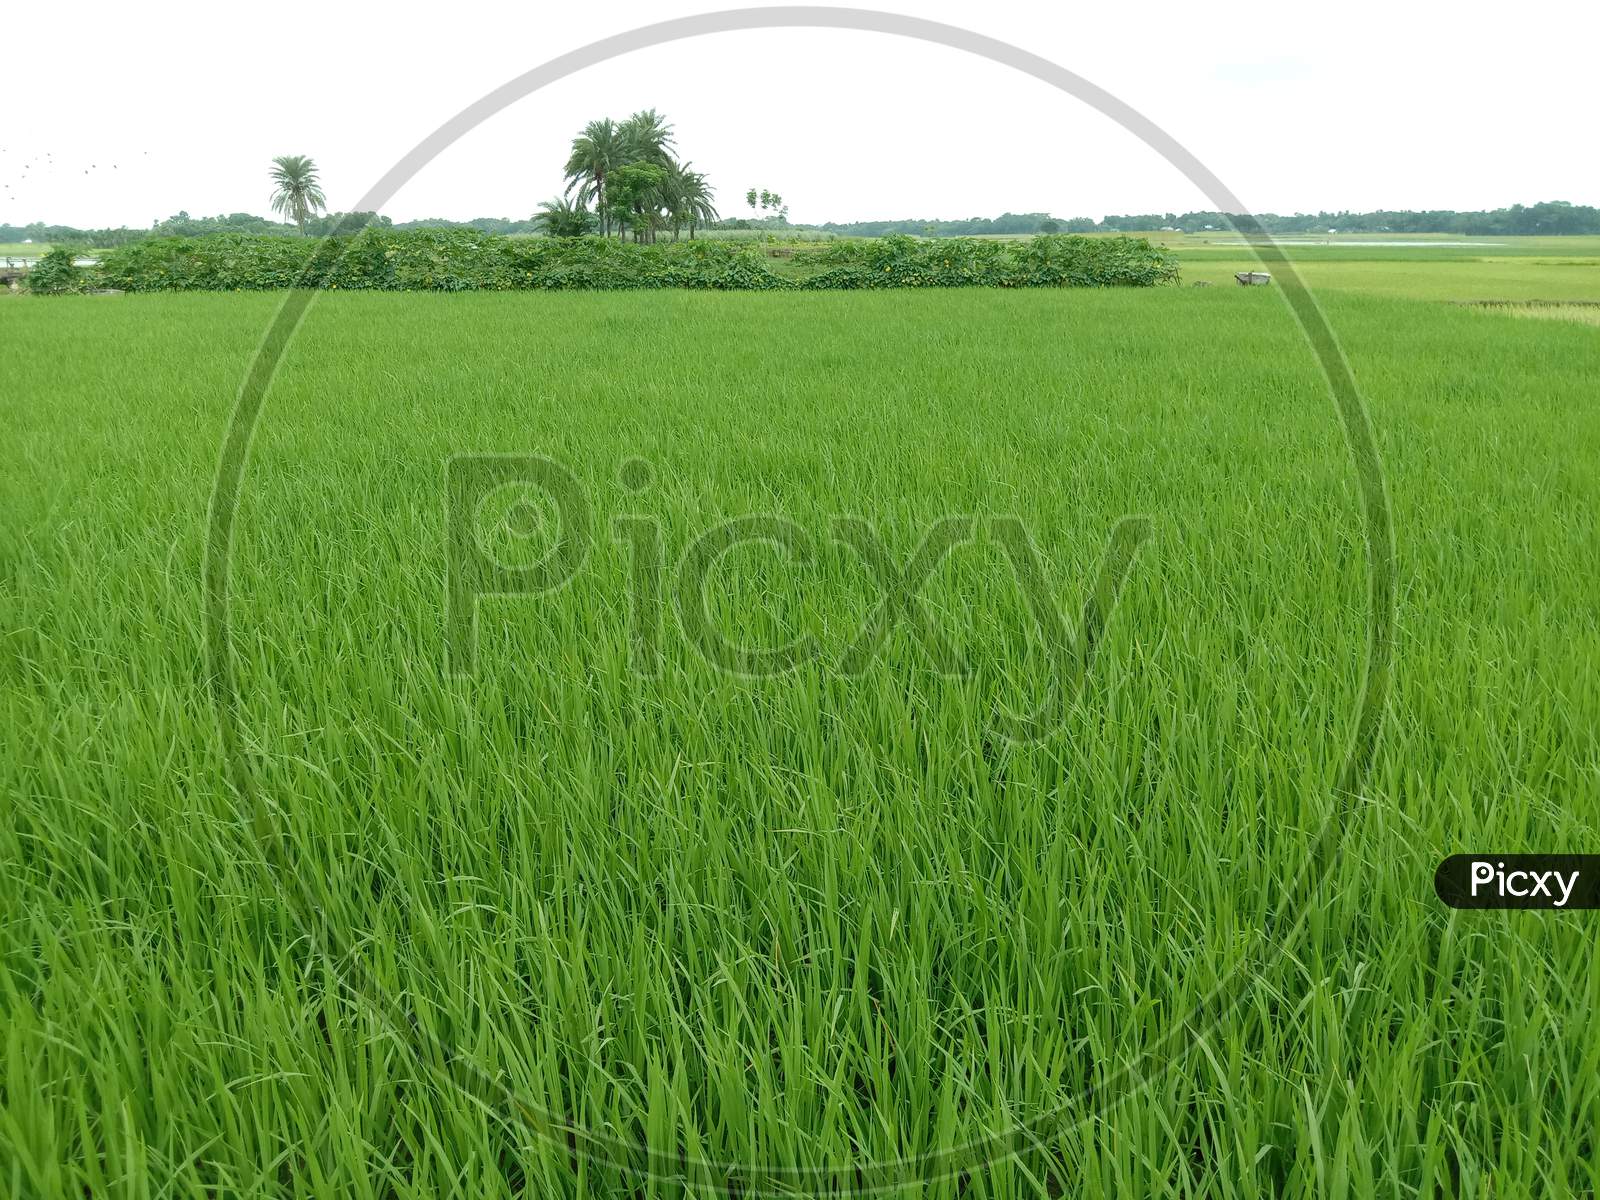 Green Colored Paddy Firm For Harvest